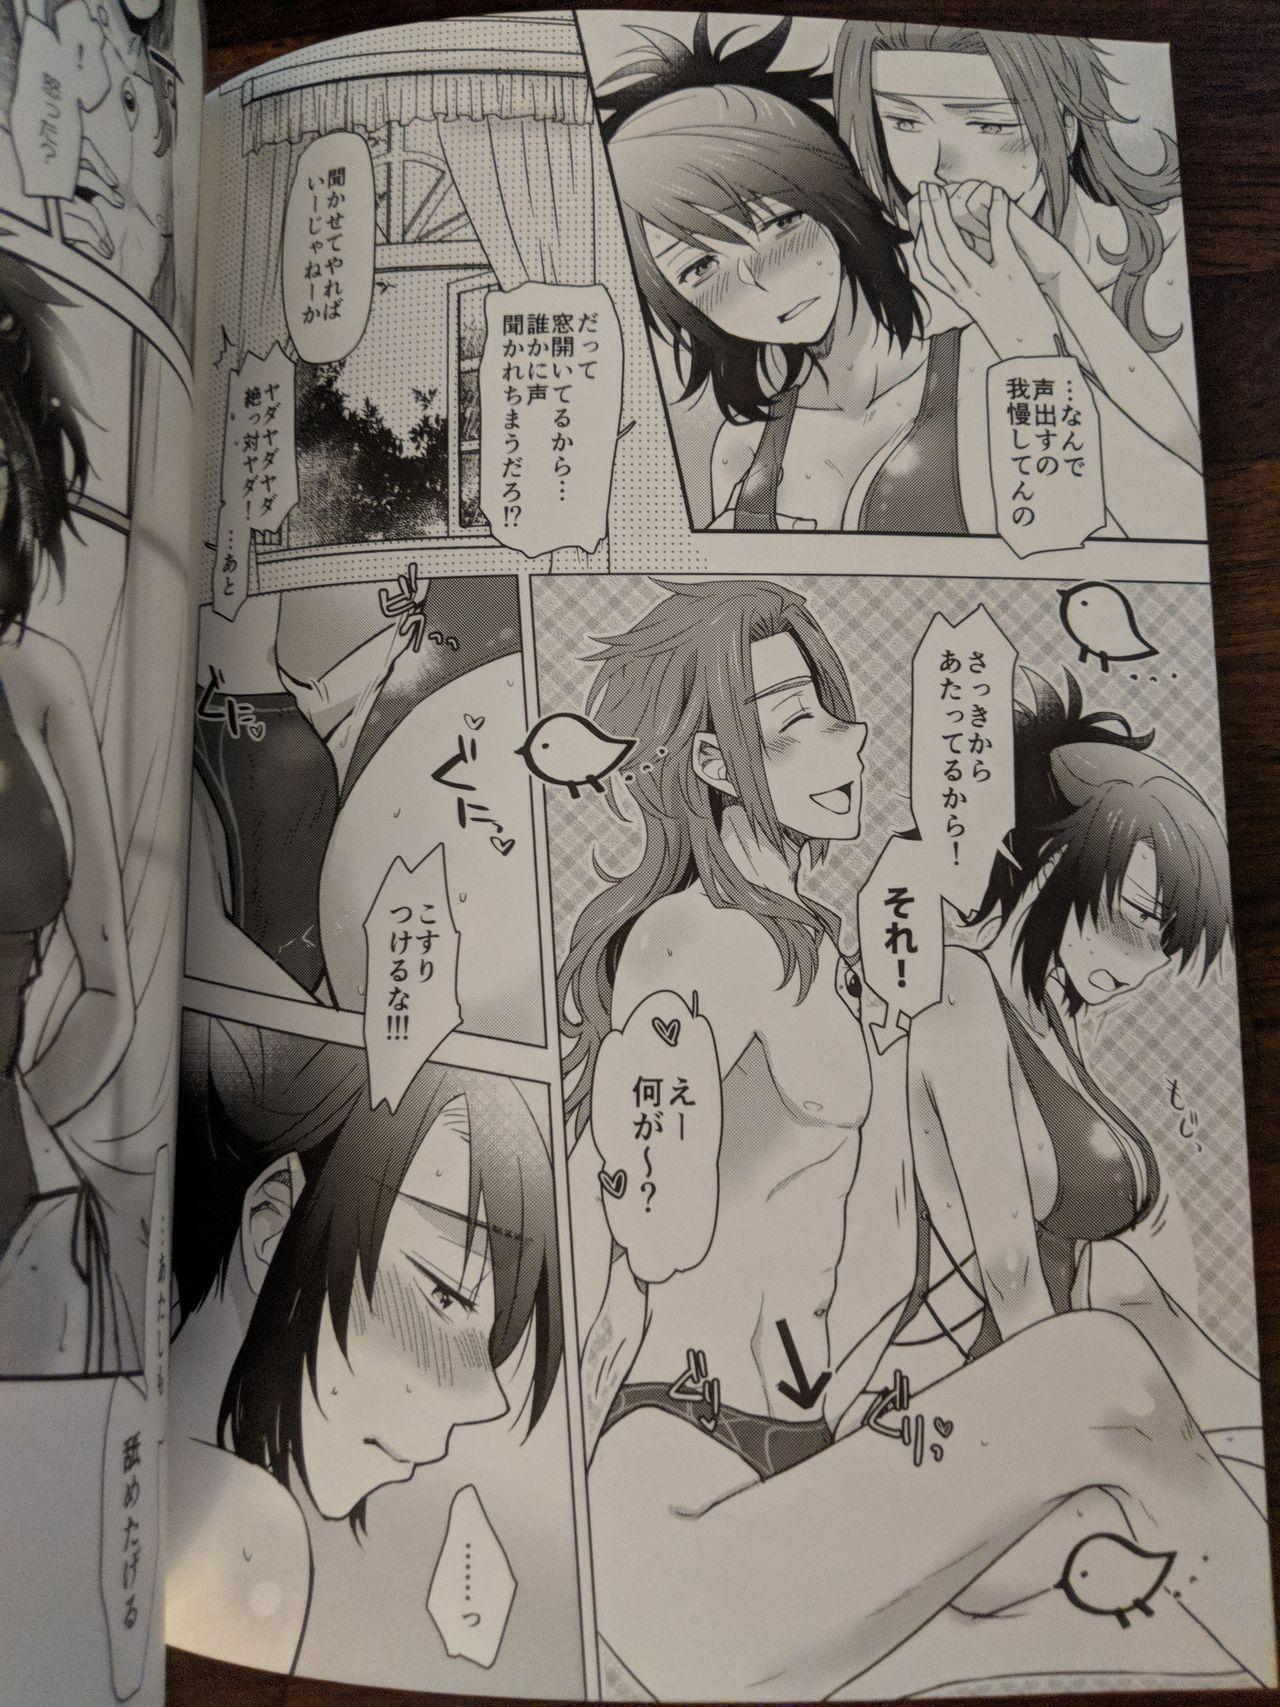 Load 彼女が水着にきがえたら - Tales of symphonia Behind - Page 11